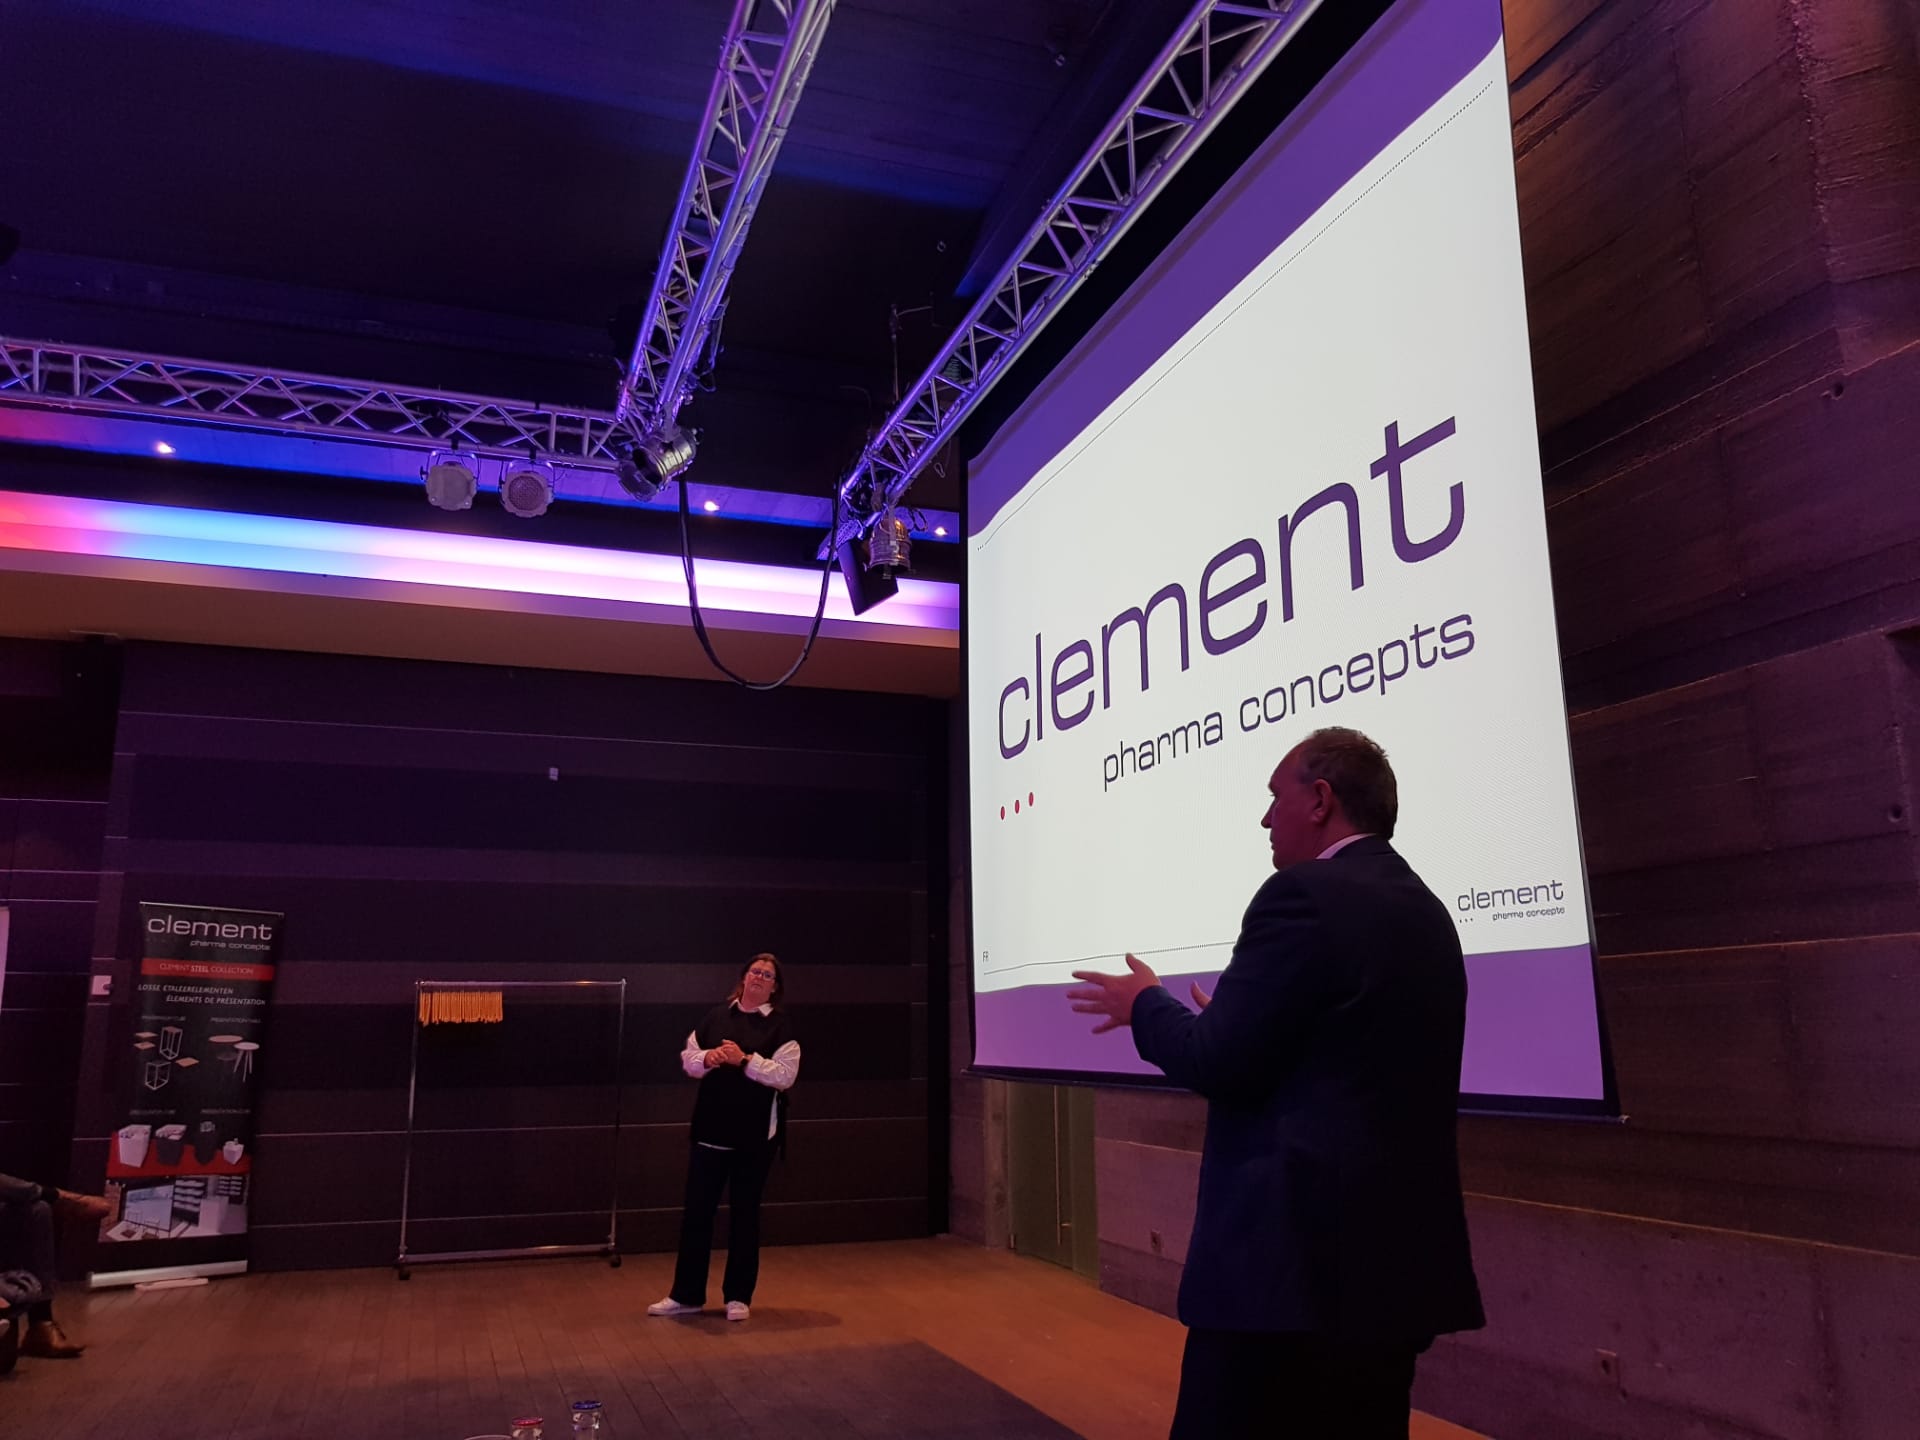 An evening with Clement Pharma